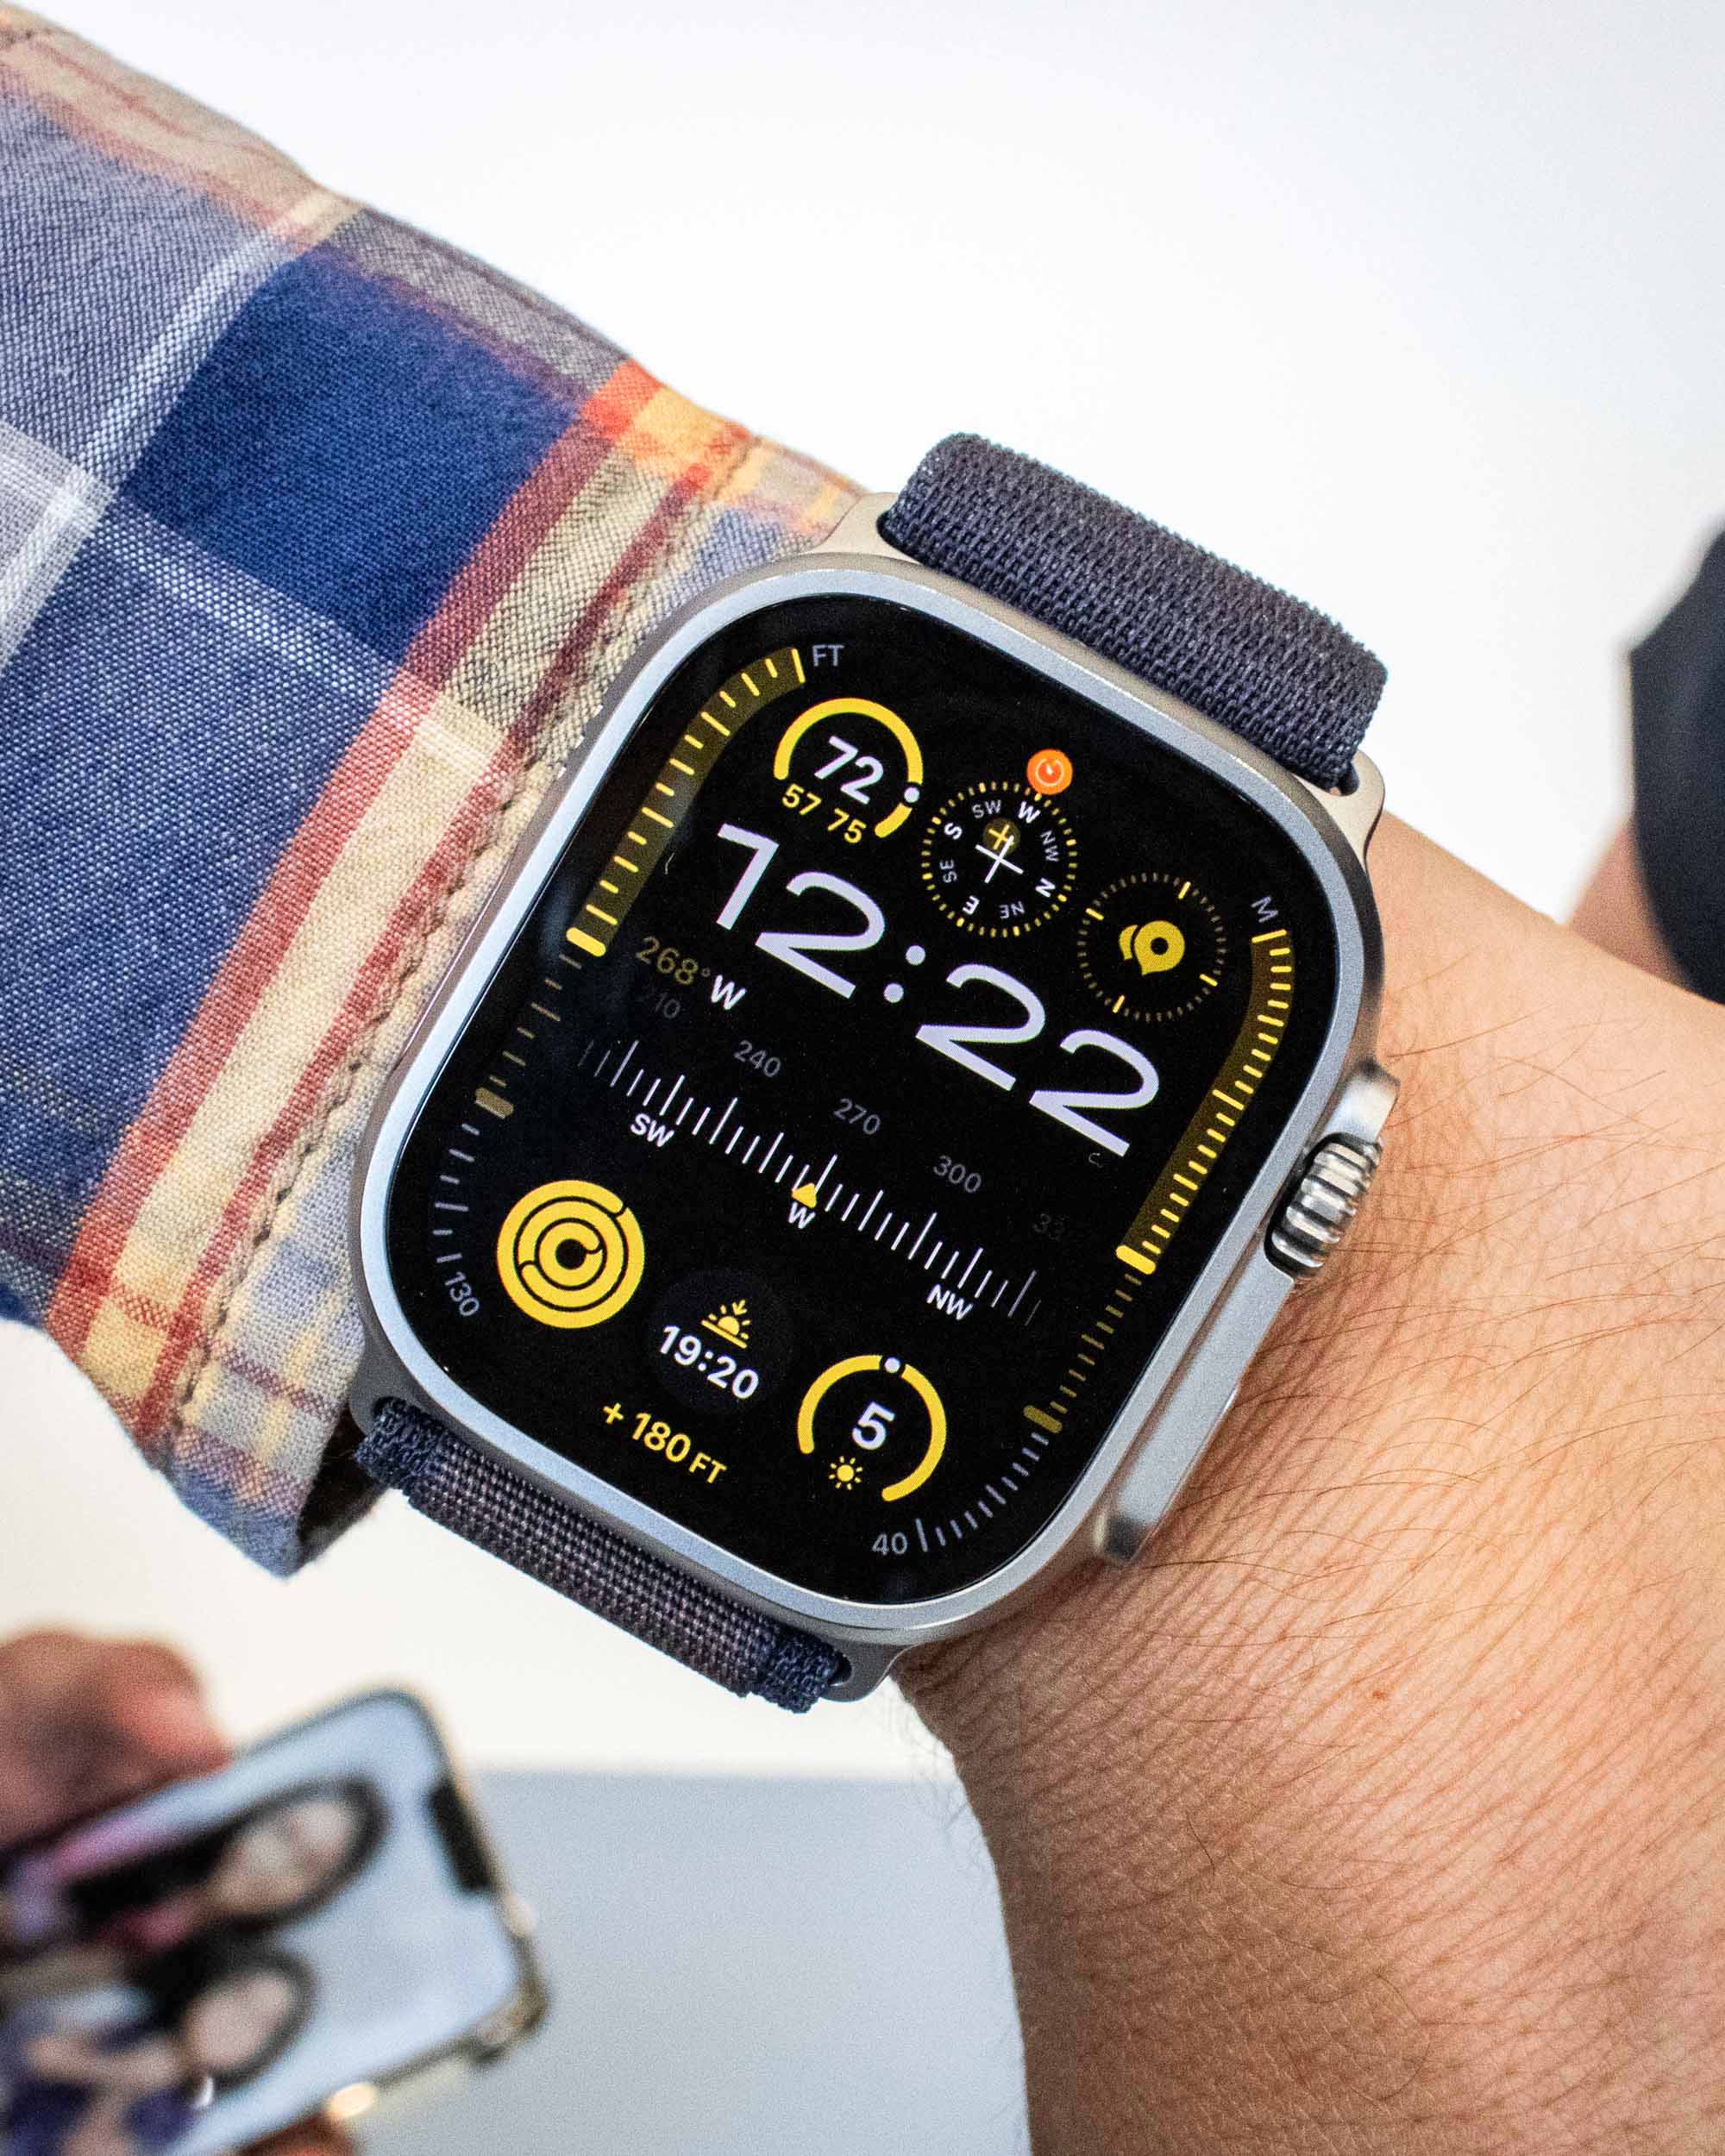 NEW Fall 2023 Sport Loops for Apple Watch Series 9  AW Ultra 2 (ALL  COLORS) Review & [Hands-On] 